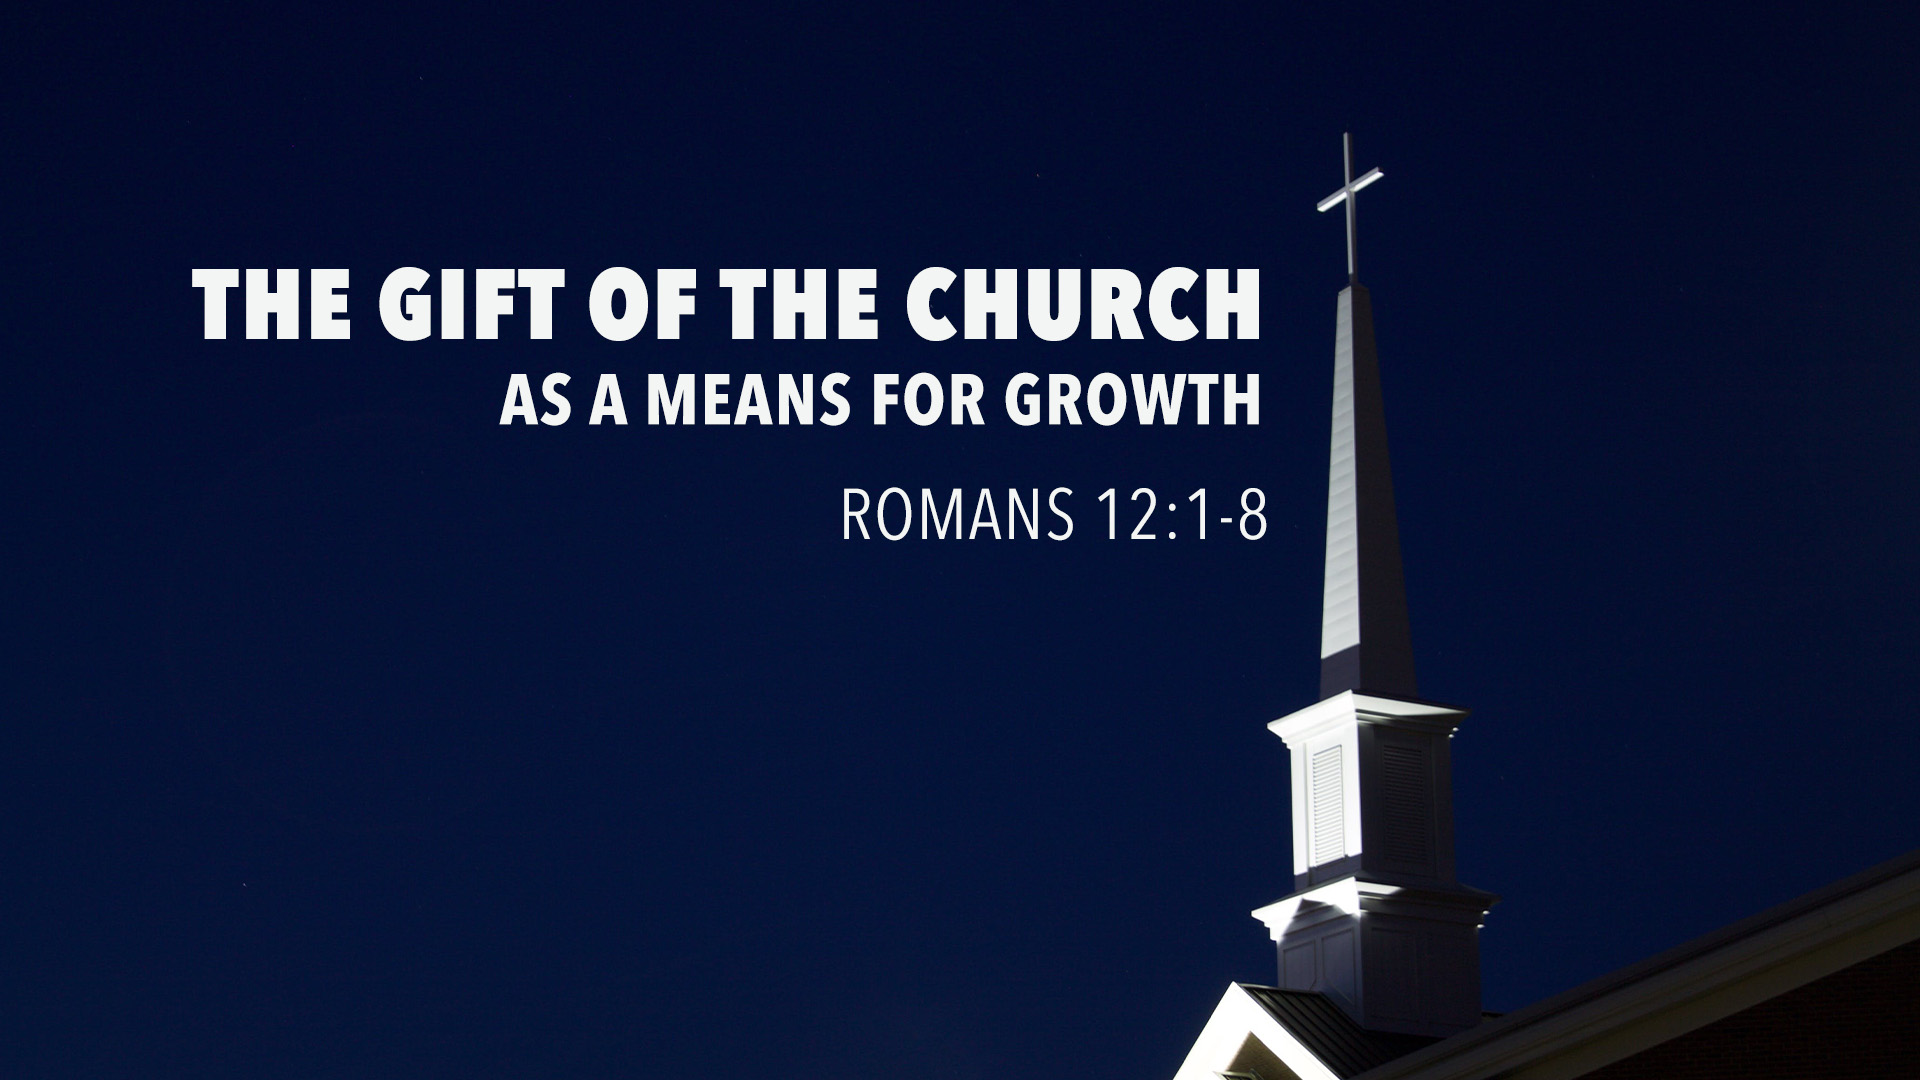 The Gift of the Church as a Means for Growth